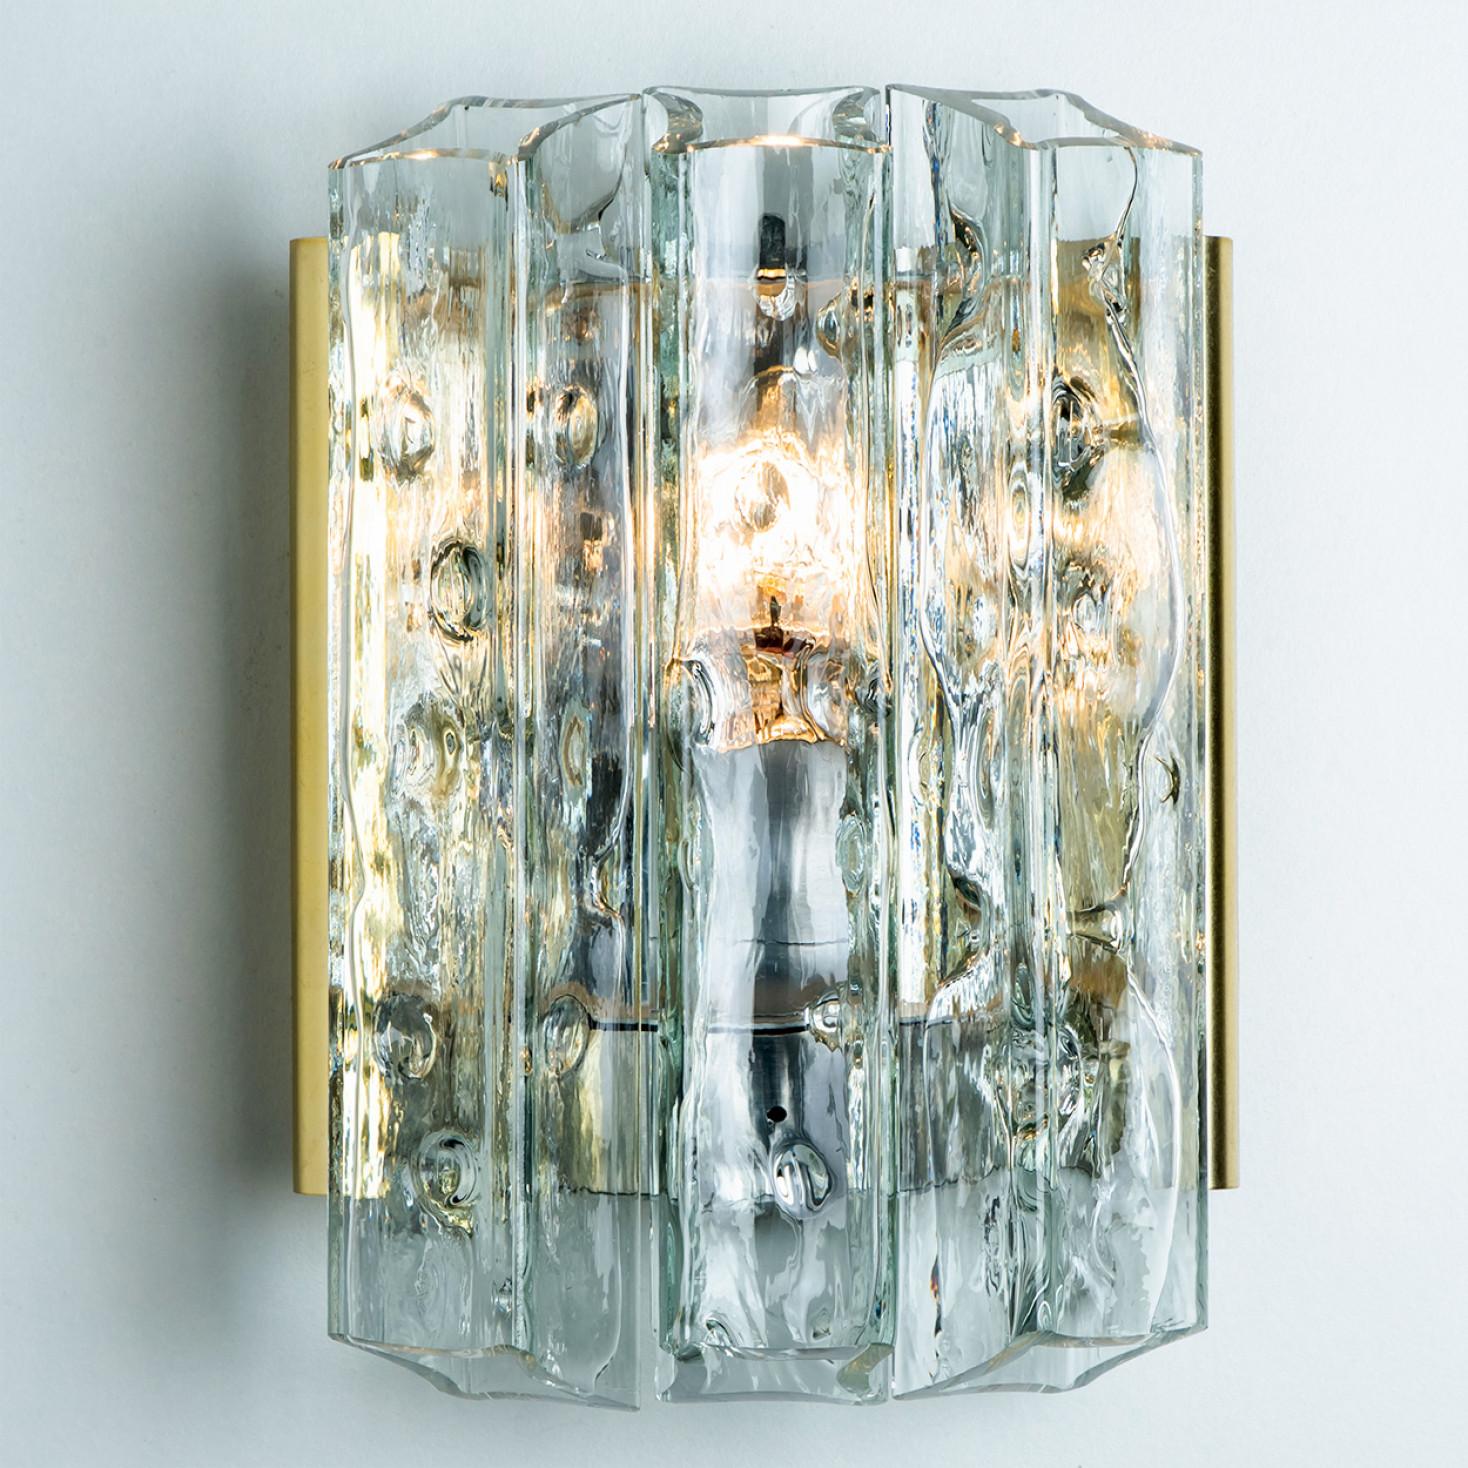 Mid-Century Modern Pair of Faceted Tubes Wall Lights by Doria Leuchten, 1960s For Sale